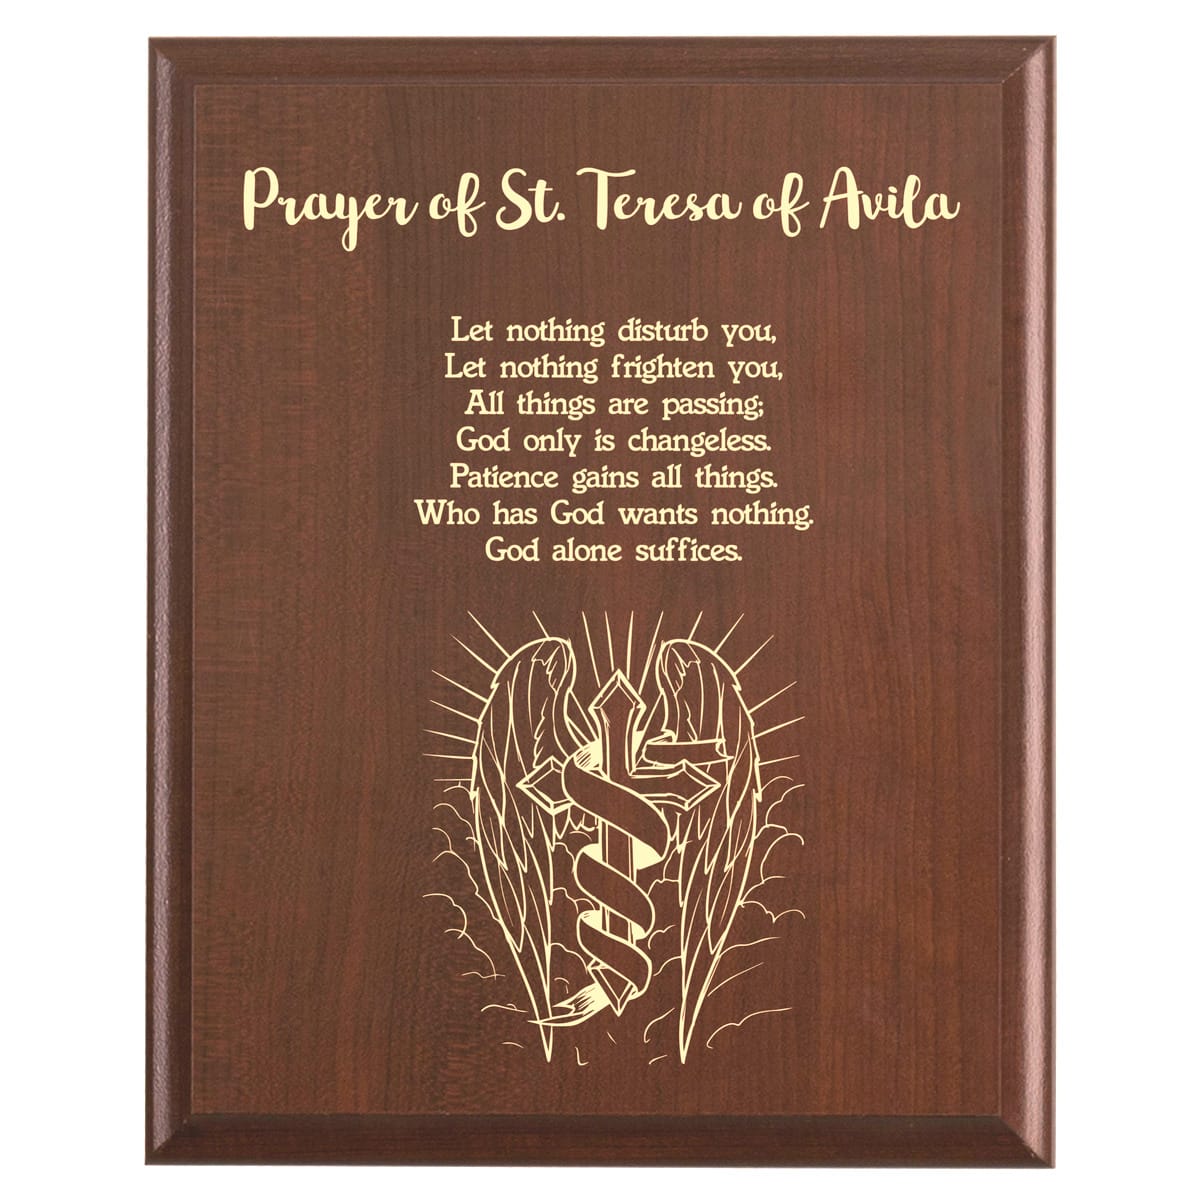 Plaque photo: St. Teresa of Avila Prayer Plaque design with free personalization. Wood style finish with customized text.